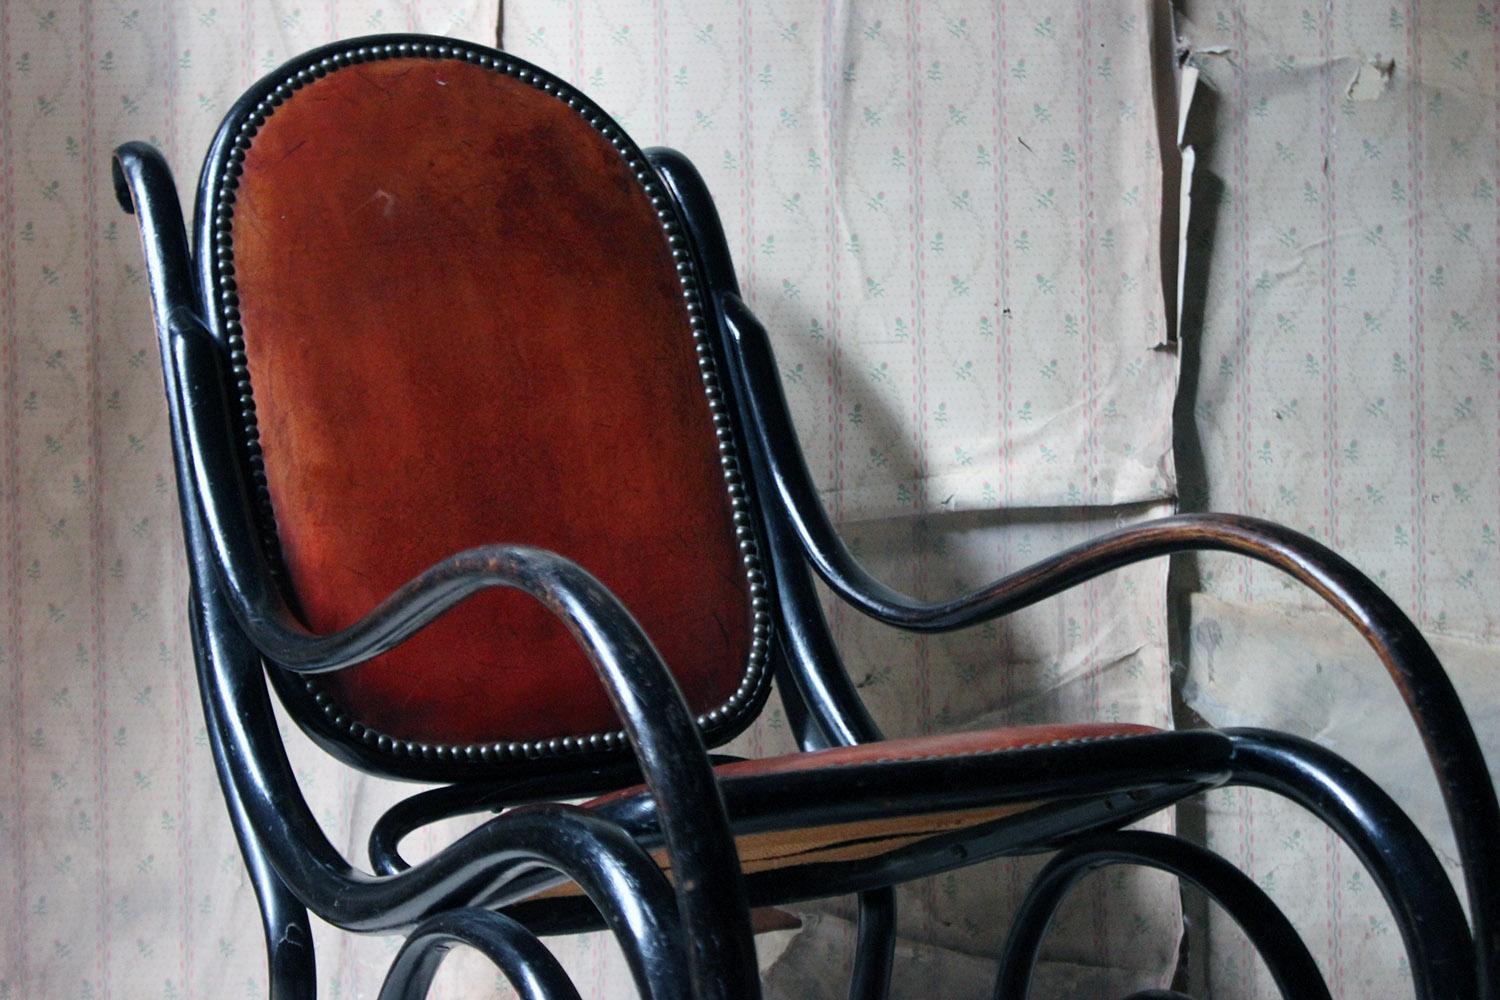 The Classic Vienna Secession style bentwood rocking chair having an ebonised scrolling frame to burgundy leather upholstery with brass hobnails, the finish to each surface now beautifully worn and surviving from the early twentieth century.

The